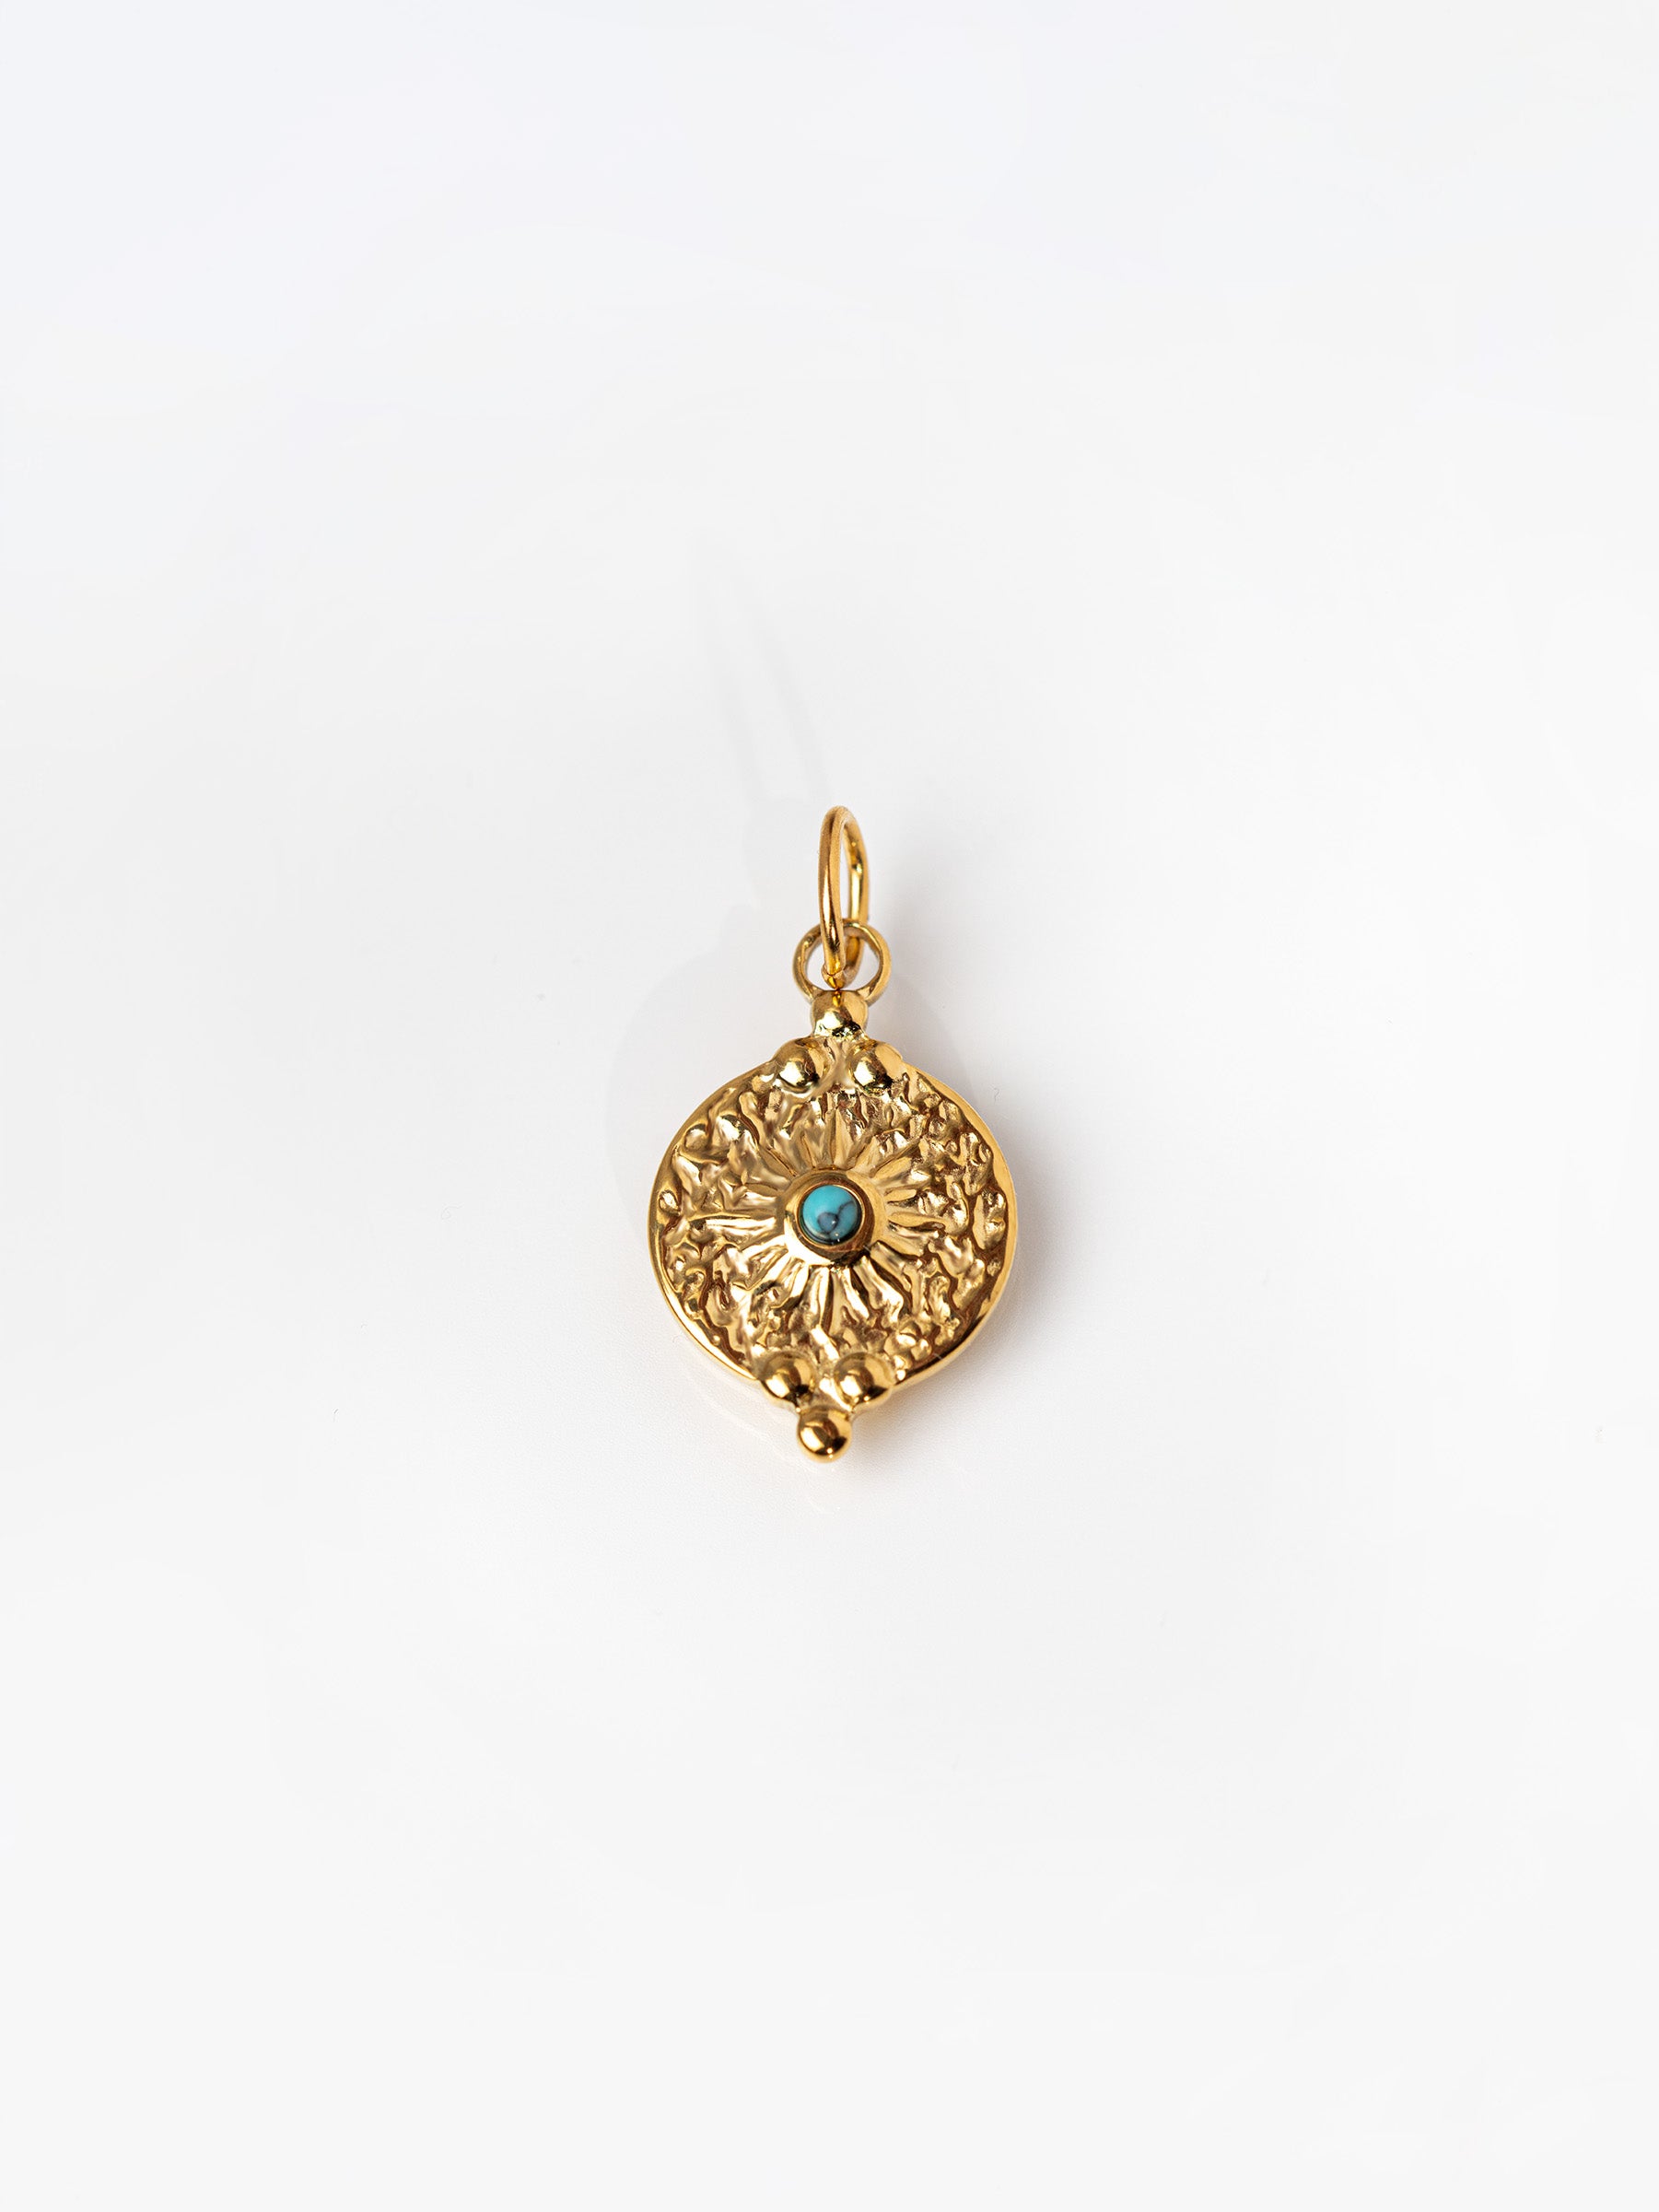 Gold Heirloom Coin Pendant / Charm With Turquoise Stone